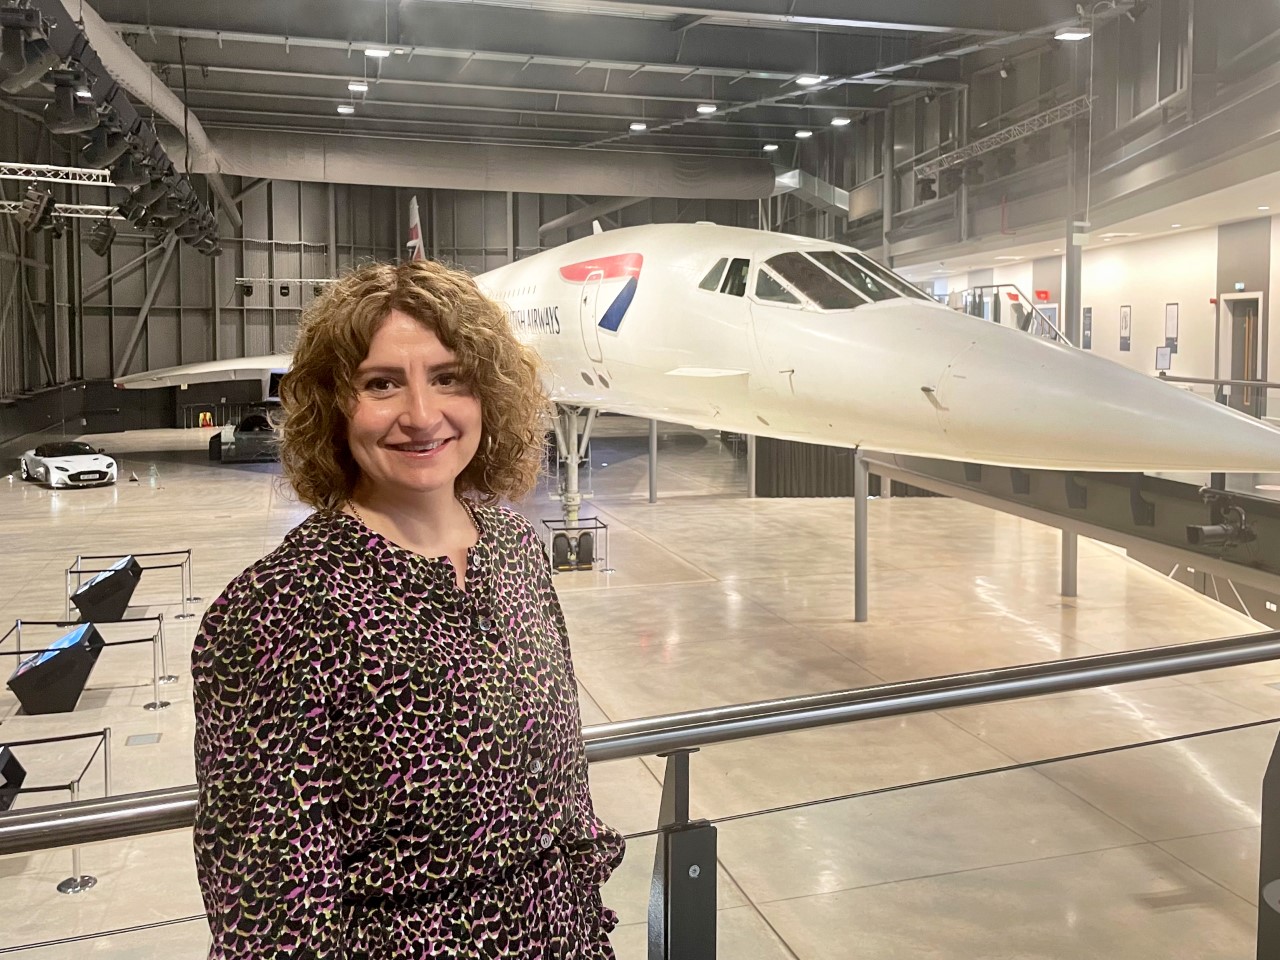 NEW CEO TO LEAD AEROSPACE BRISTOL ON THE NEXT LEG OF ITS JOURNEY